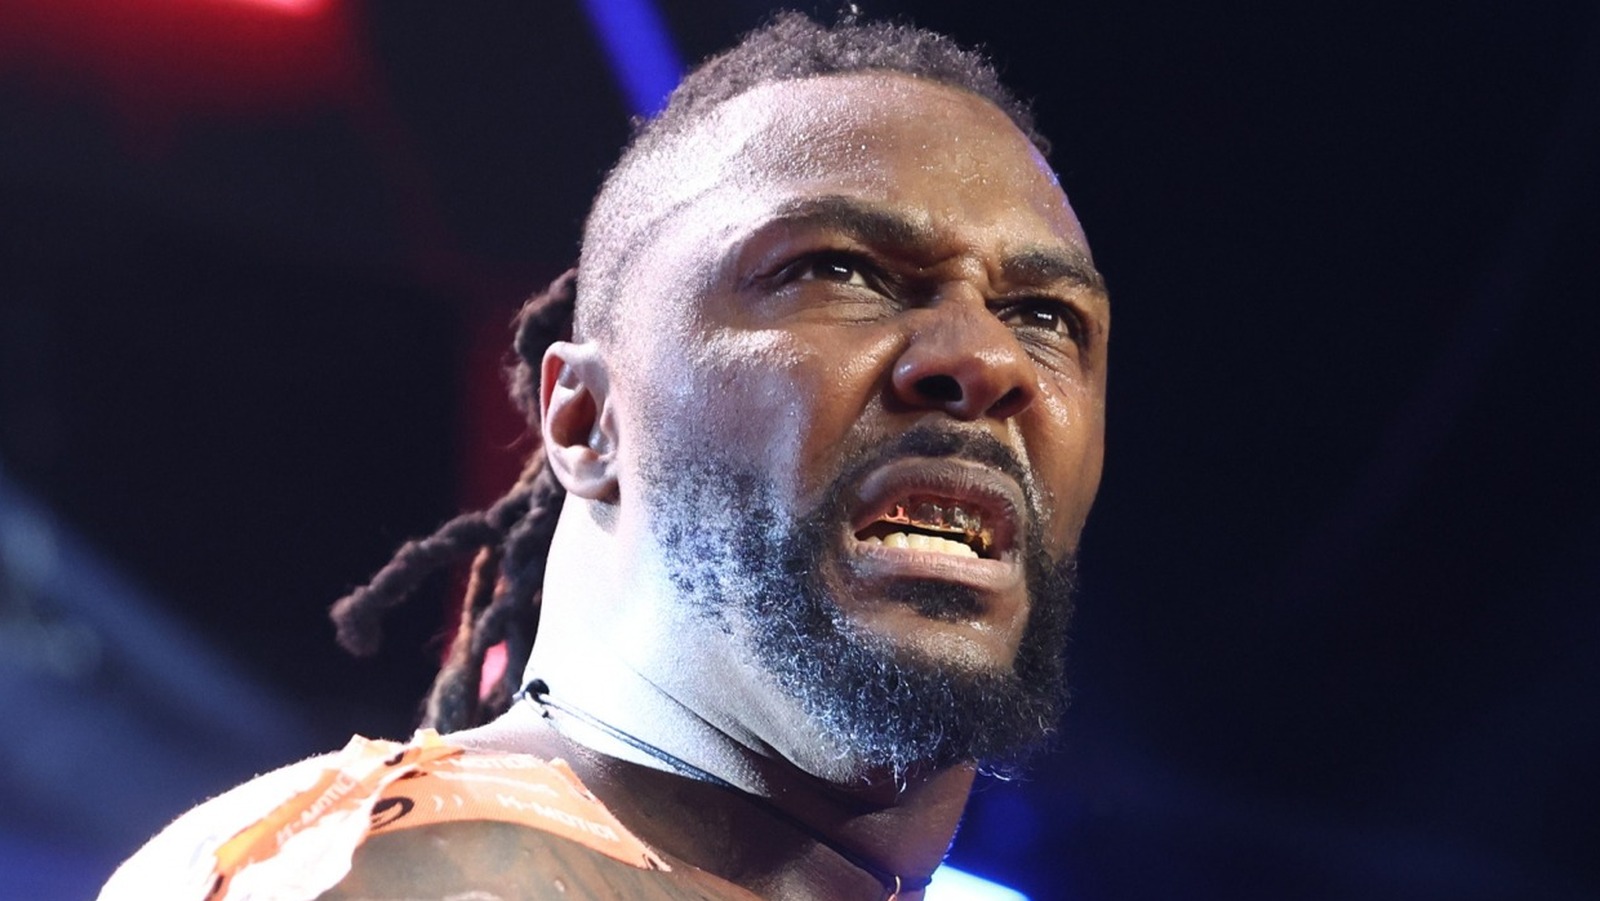 AEW's Swerve Strickland Discusses Being 'Enthralled' With Bray Wyatt's ...